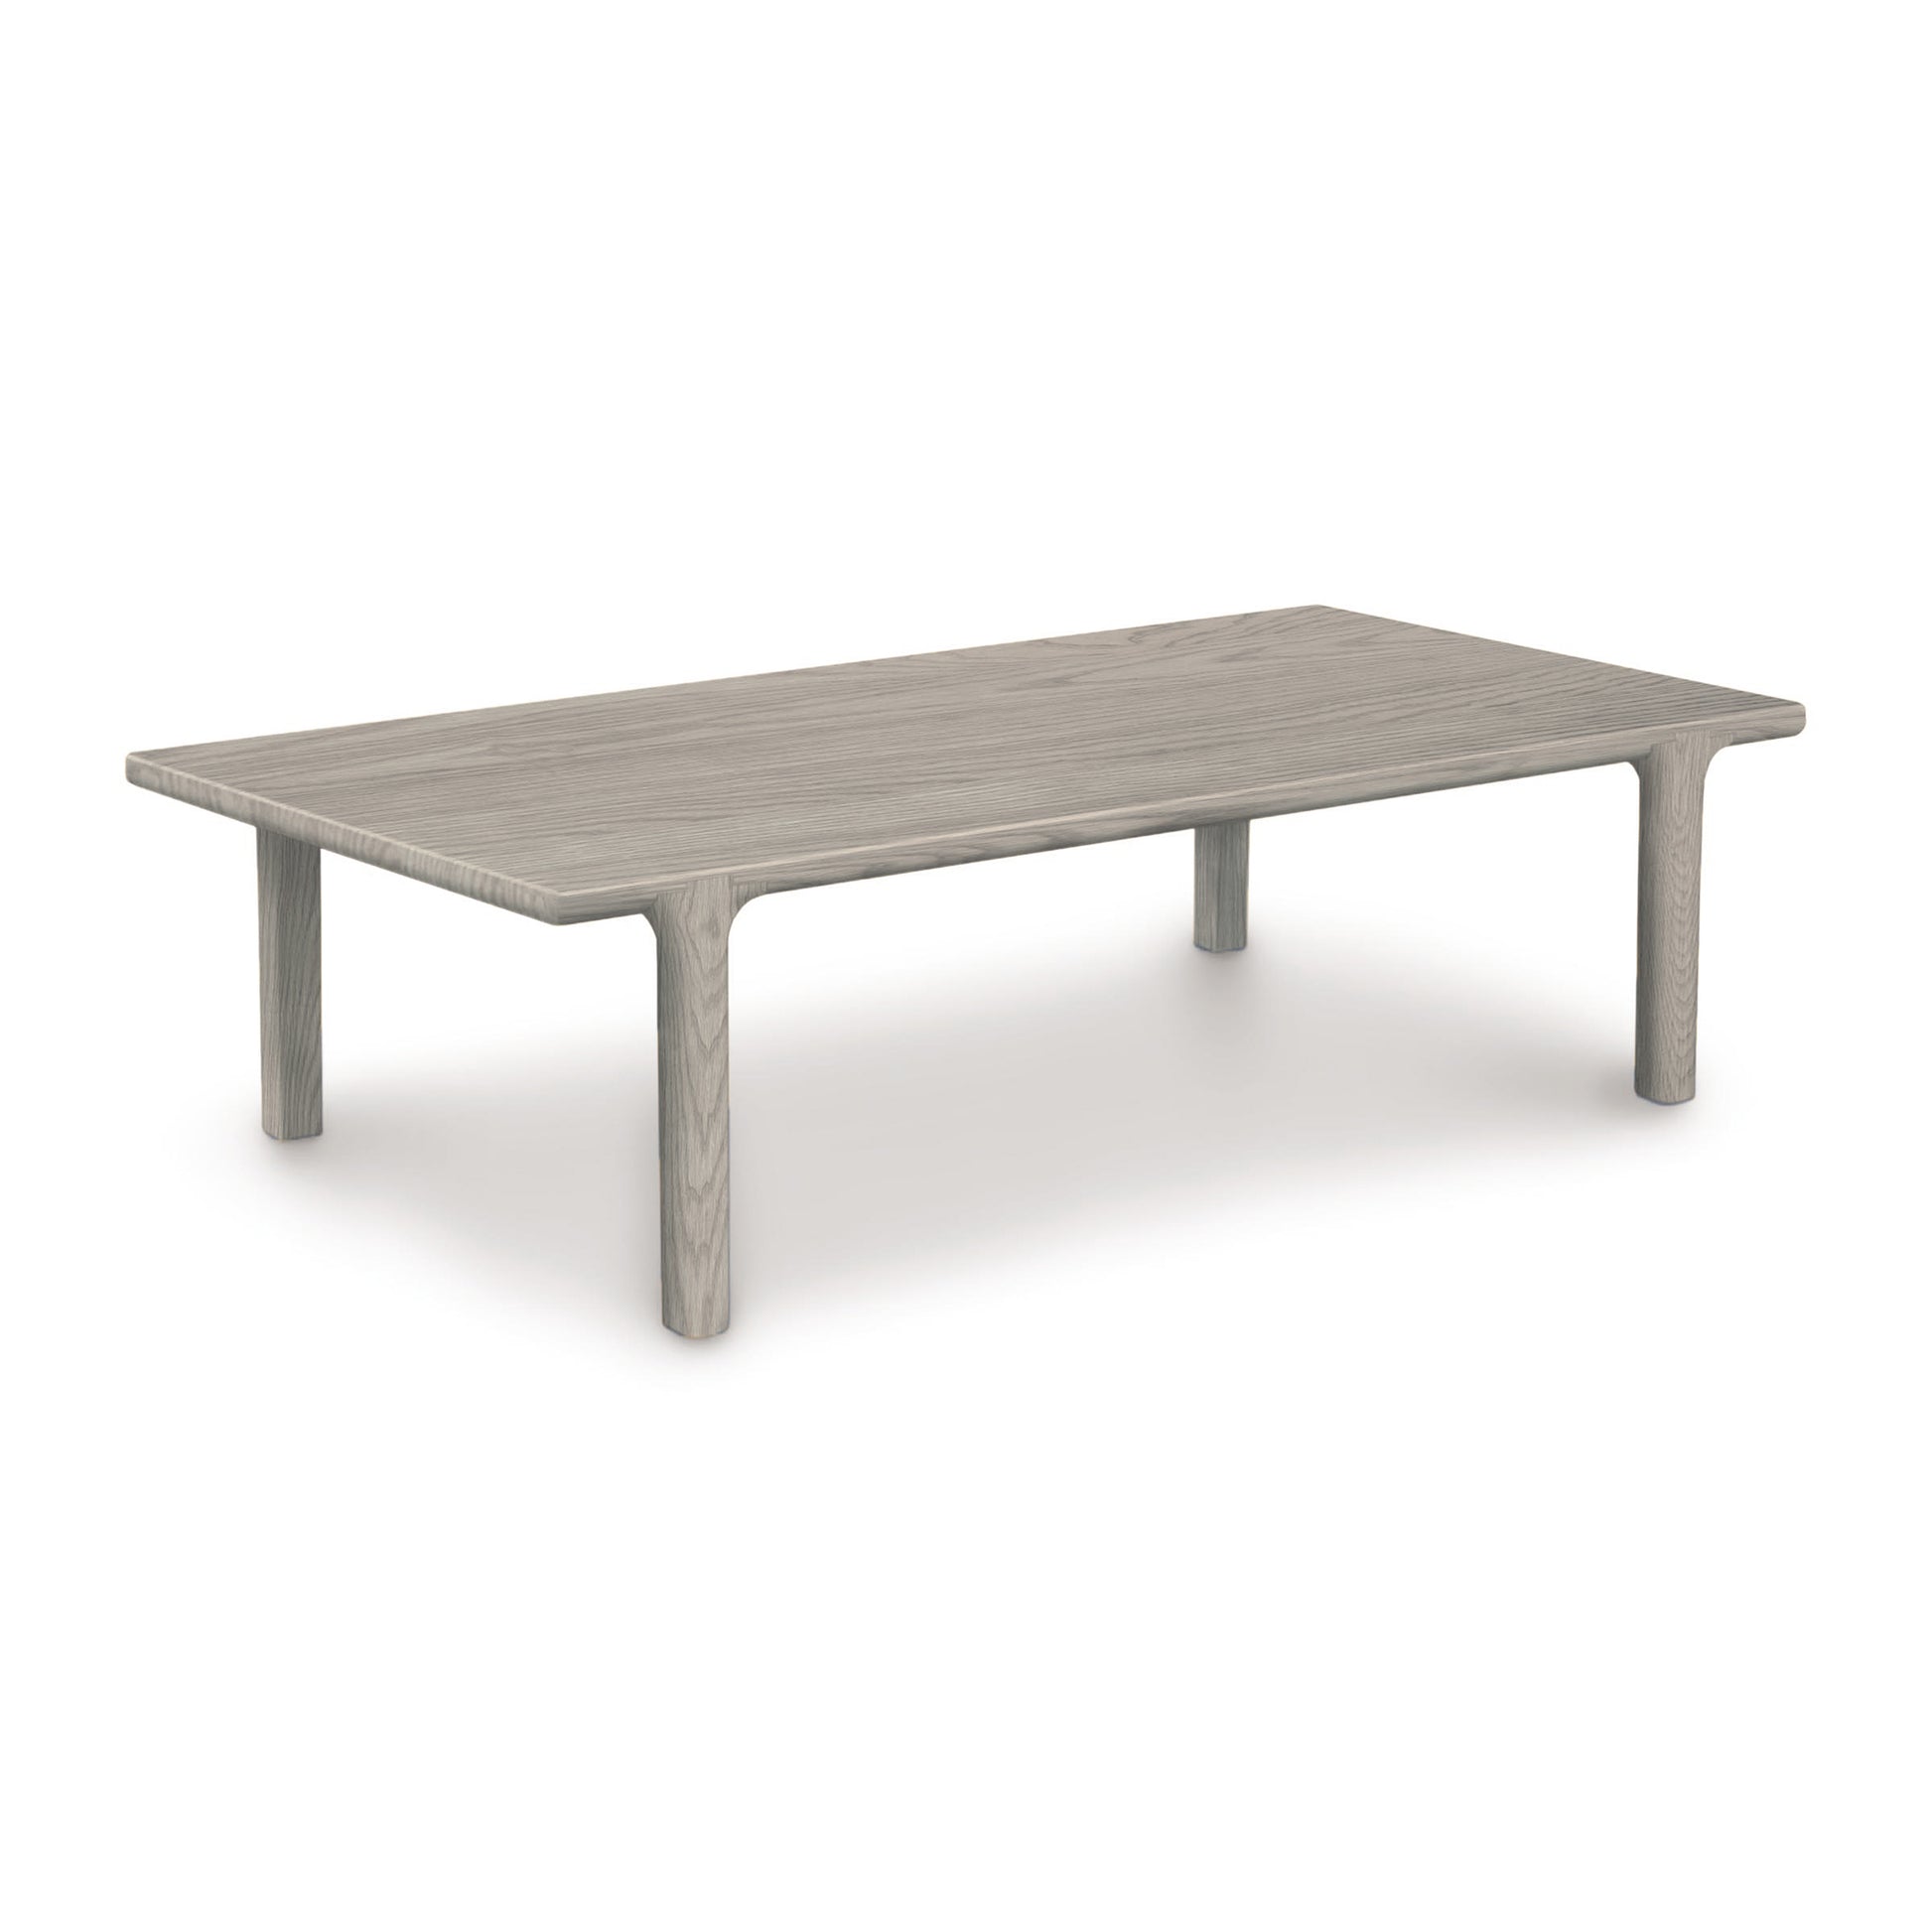 A Sierra Rectangular Coffee Table by Copeland Furniture on a white background.